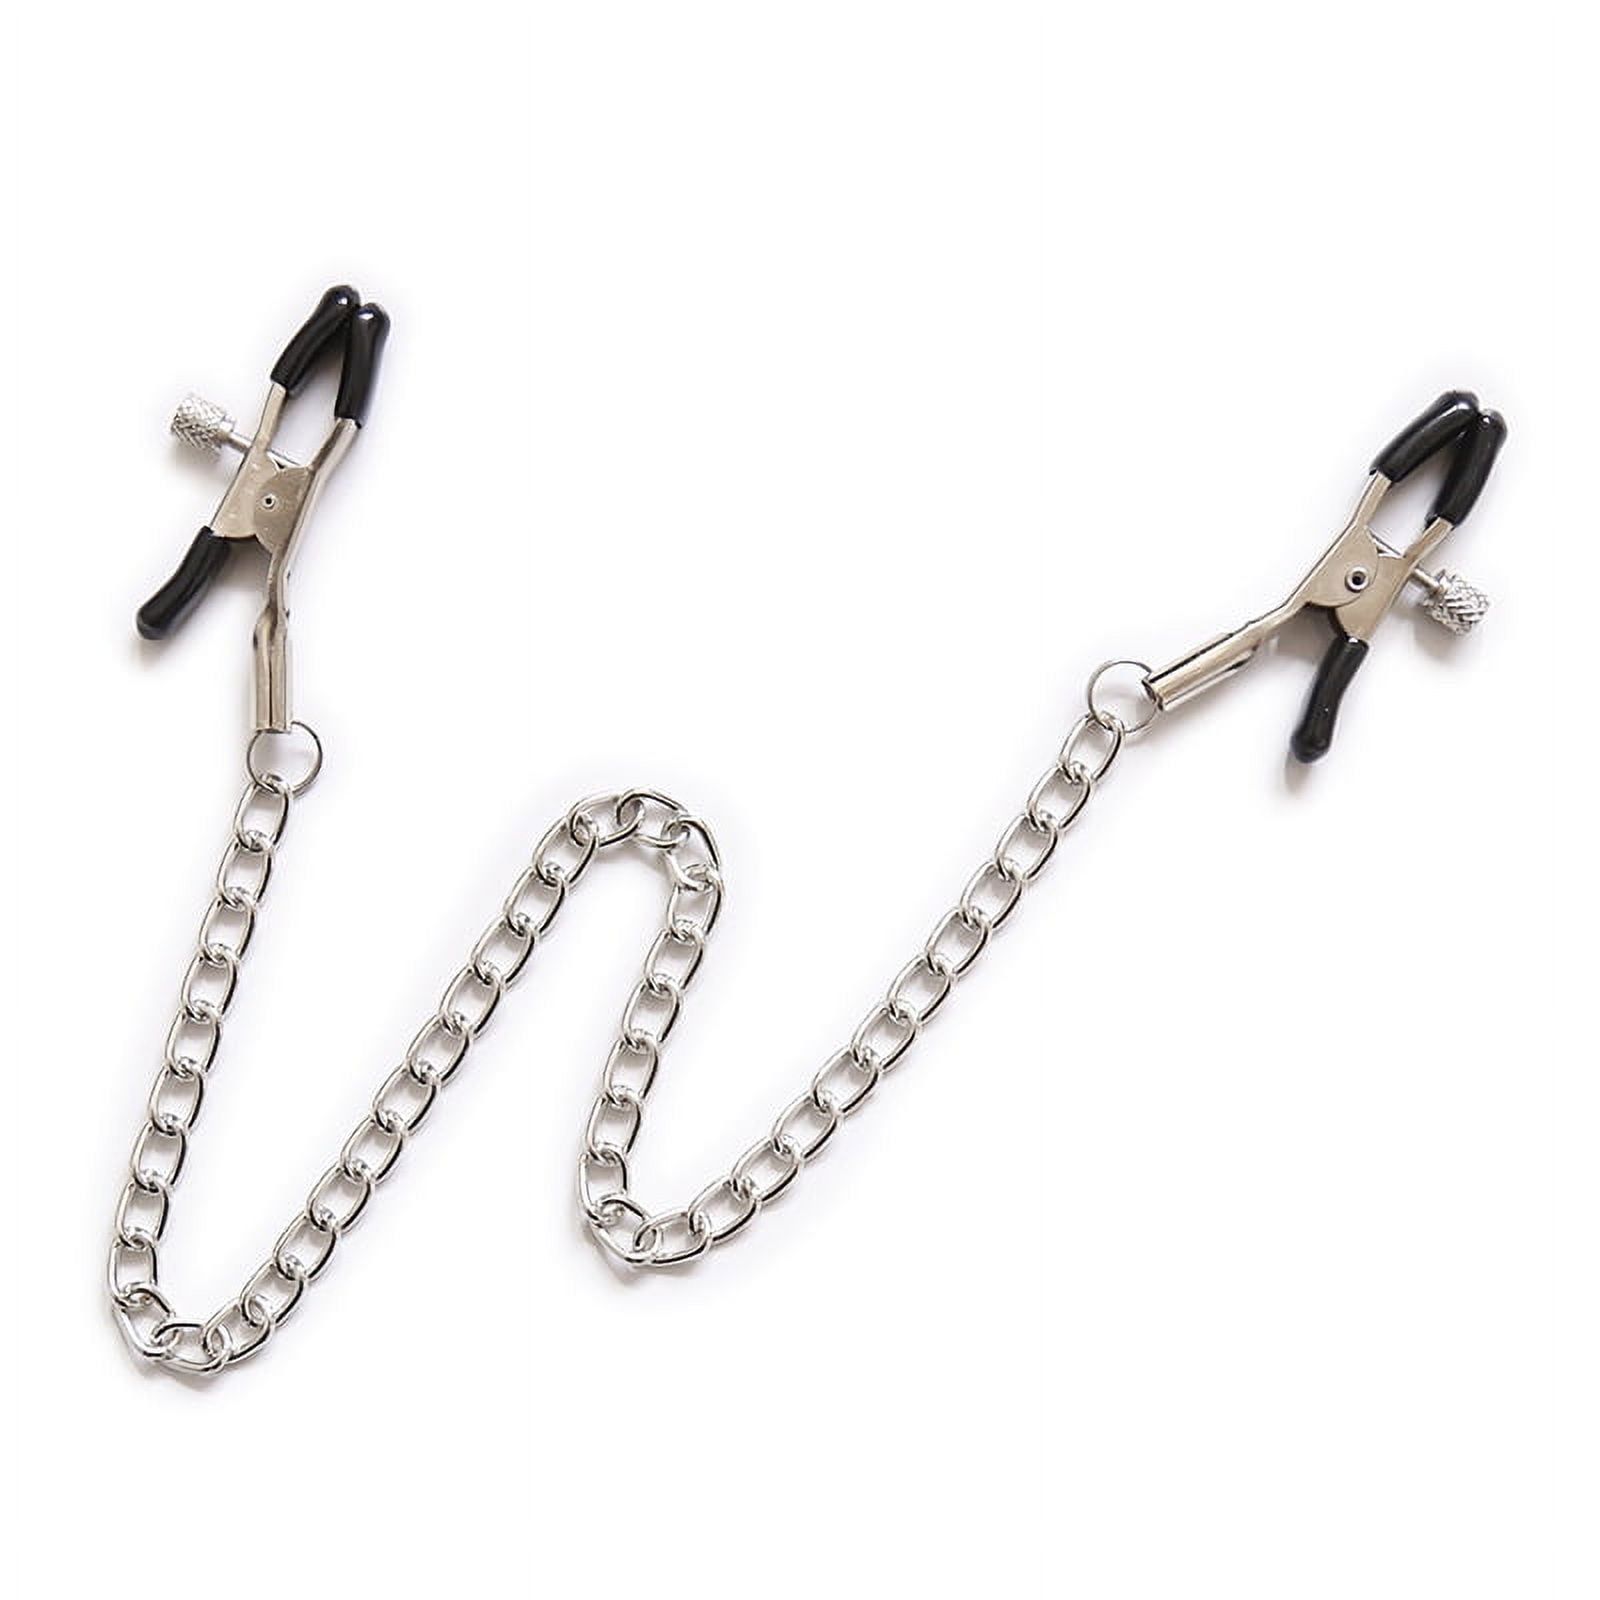 HONSITML Adjustable Pressure Clips Clamps Jewelry Non Piercing Nipple Rings  with Metal Chain